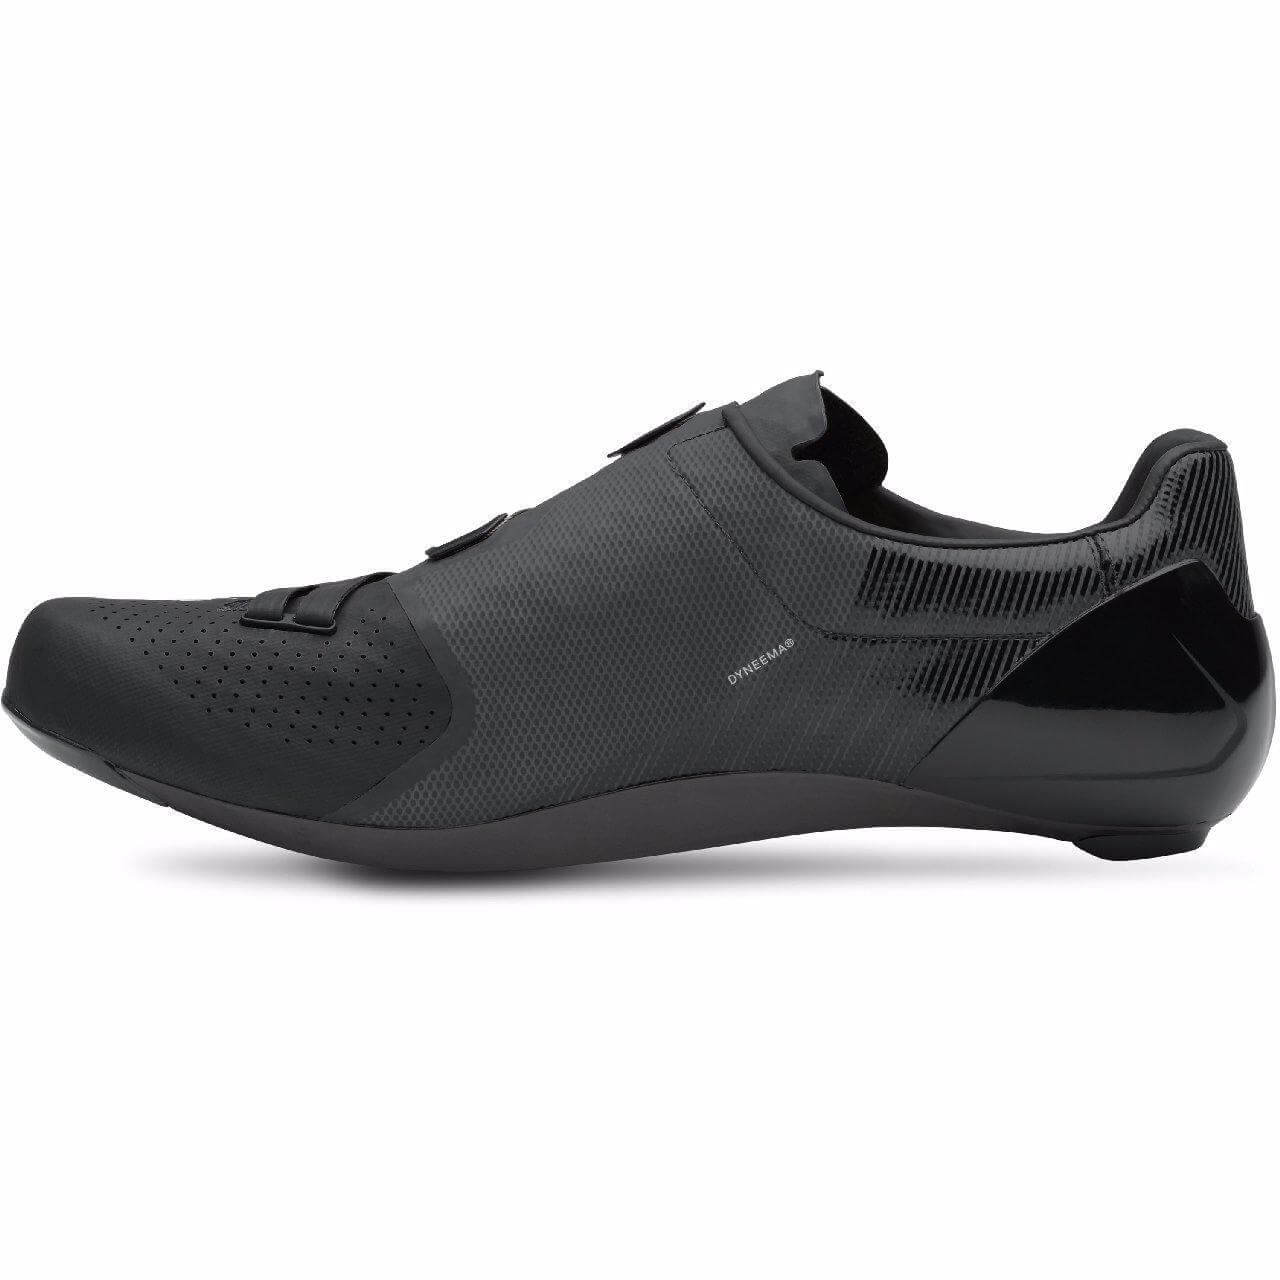 Specialized S-Works 7 Road Shoes - Sagan Collection LTD | Strictly